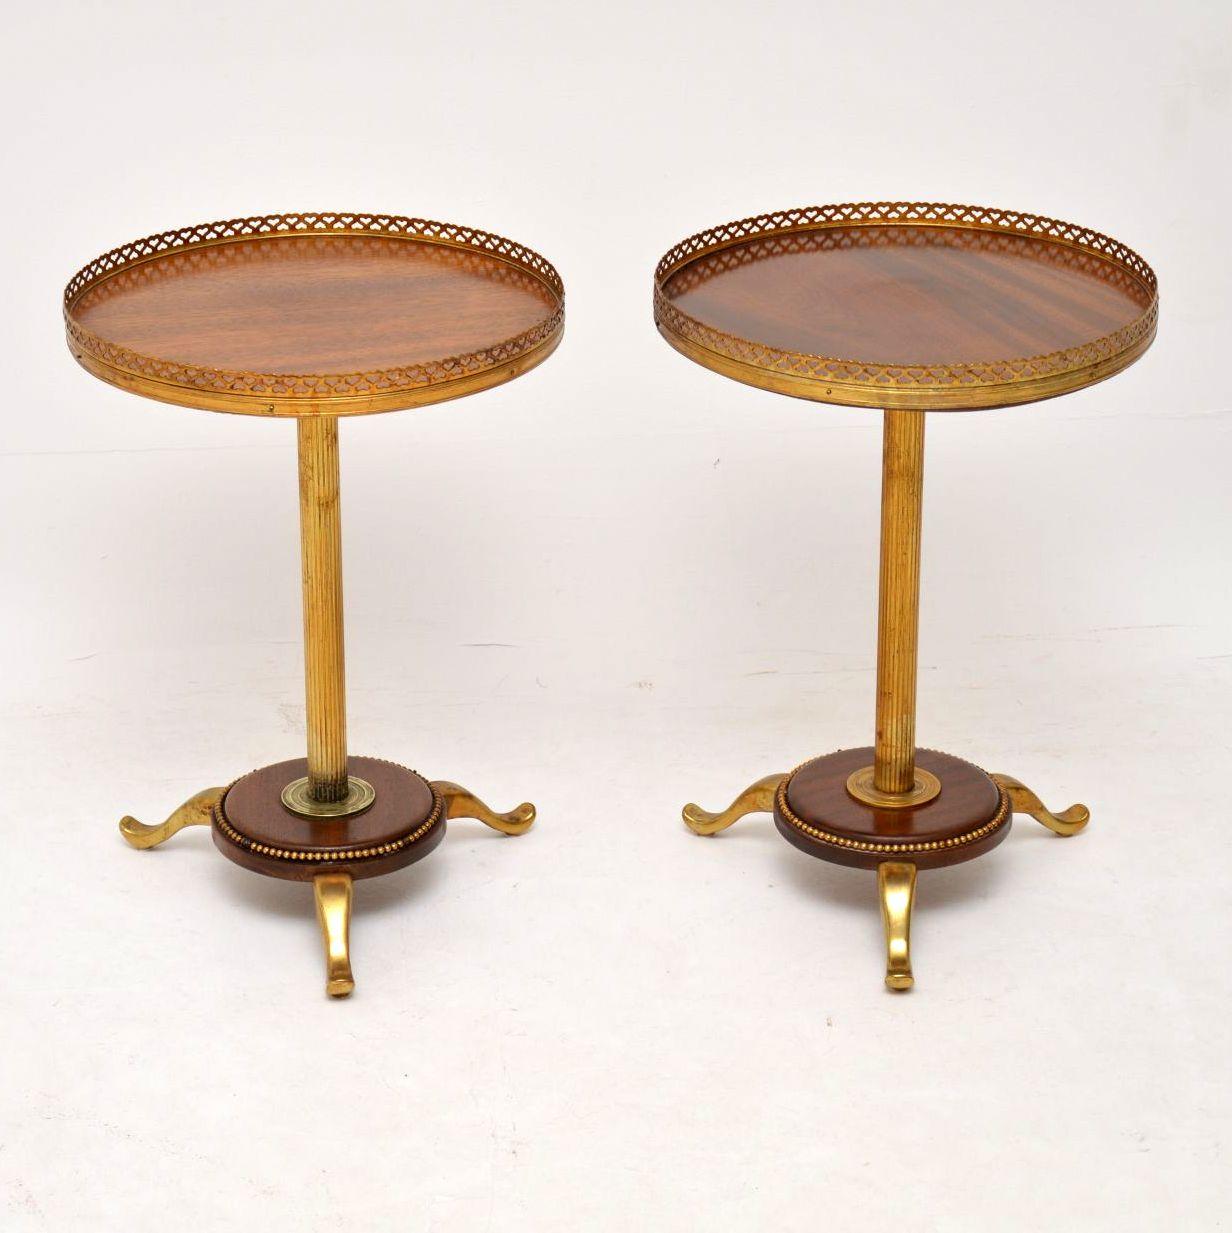 Unusual pair of antique wine tables with a combination of brass and mahogany. They have mahogany tops surrounded by brass galleries and brass fluted pedestals that sit on mahogany platforms with brass legs. They are in good original condition and I